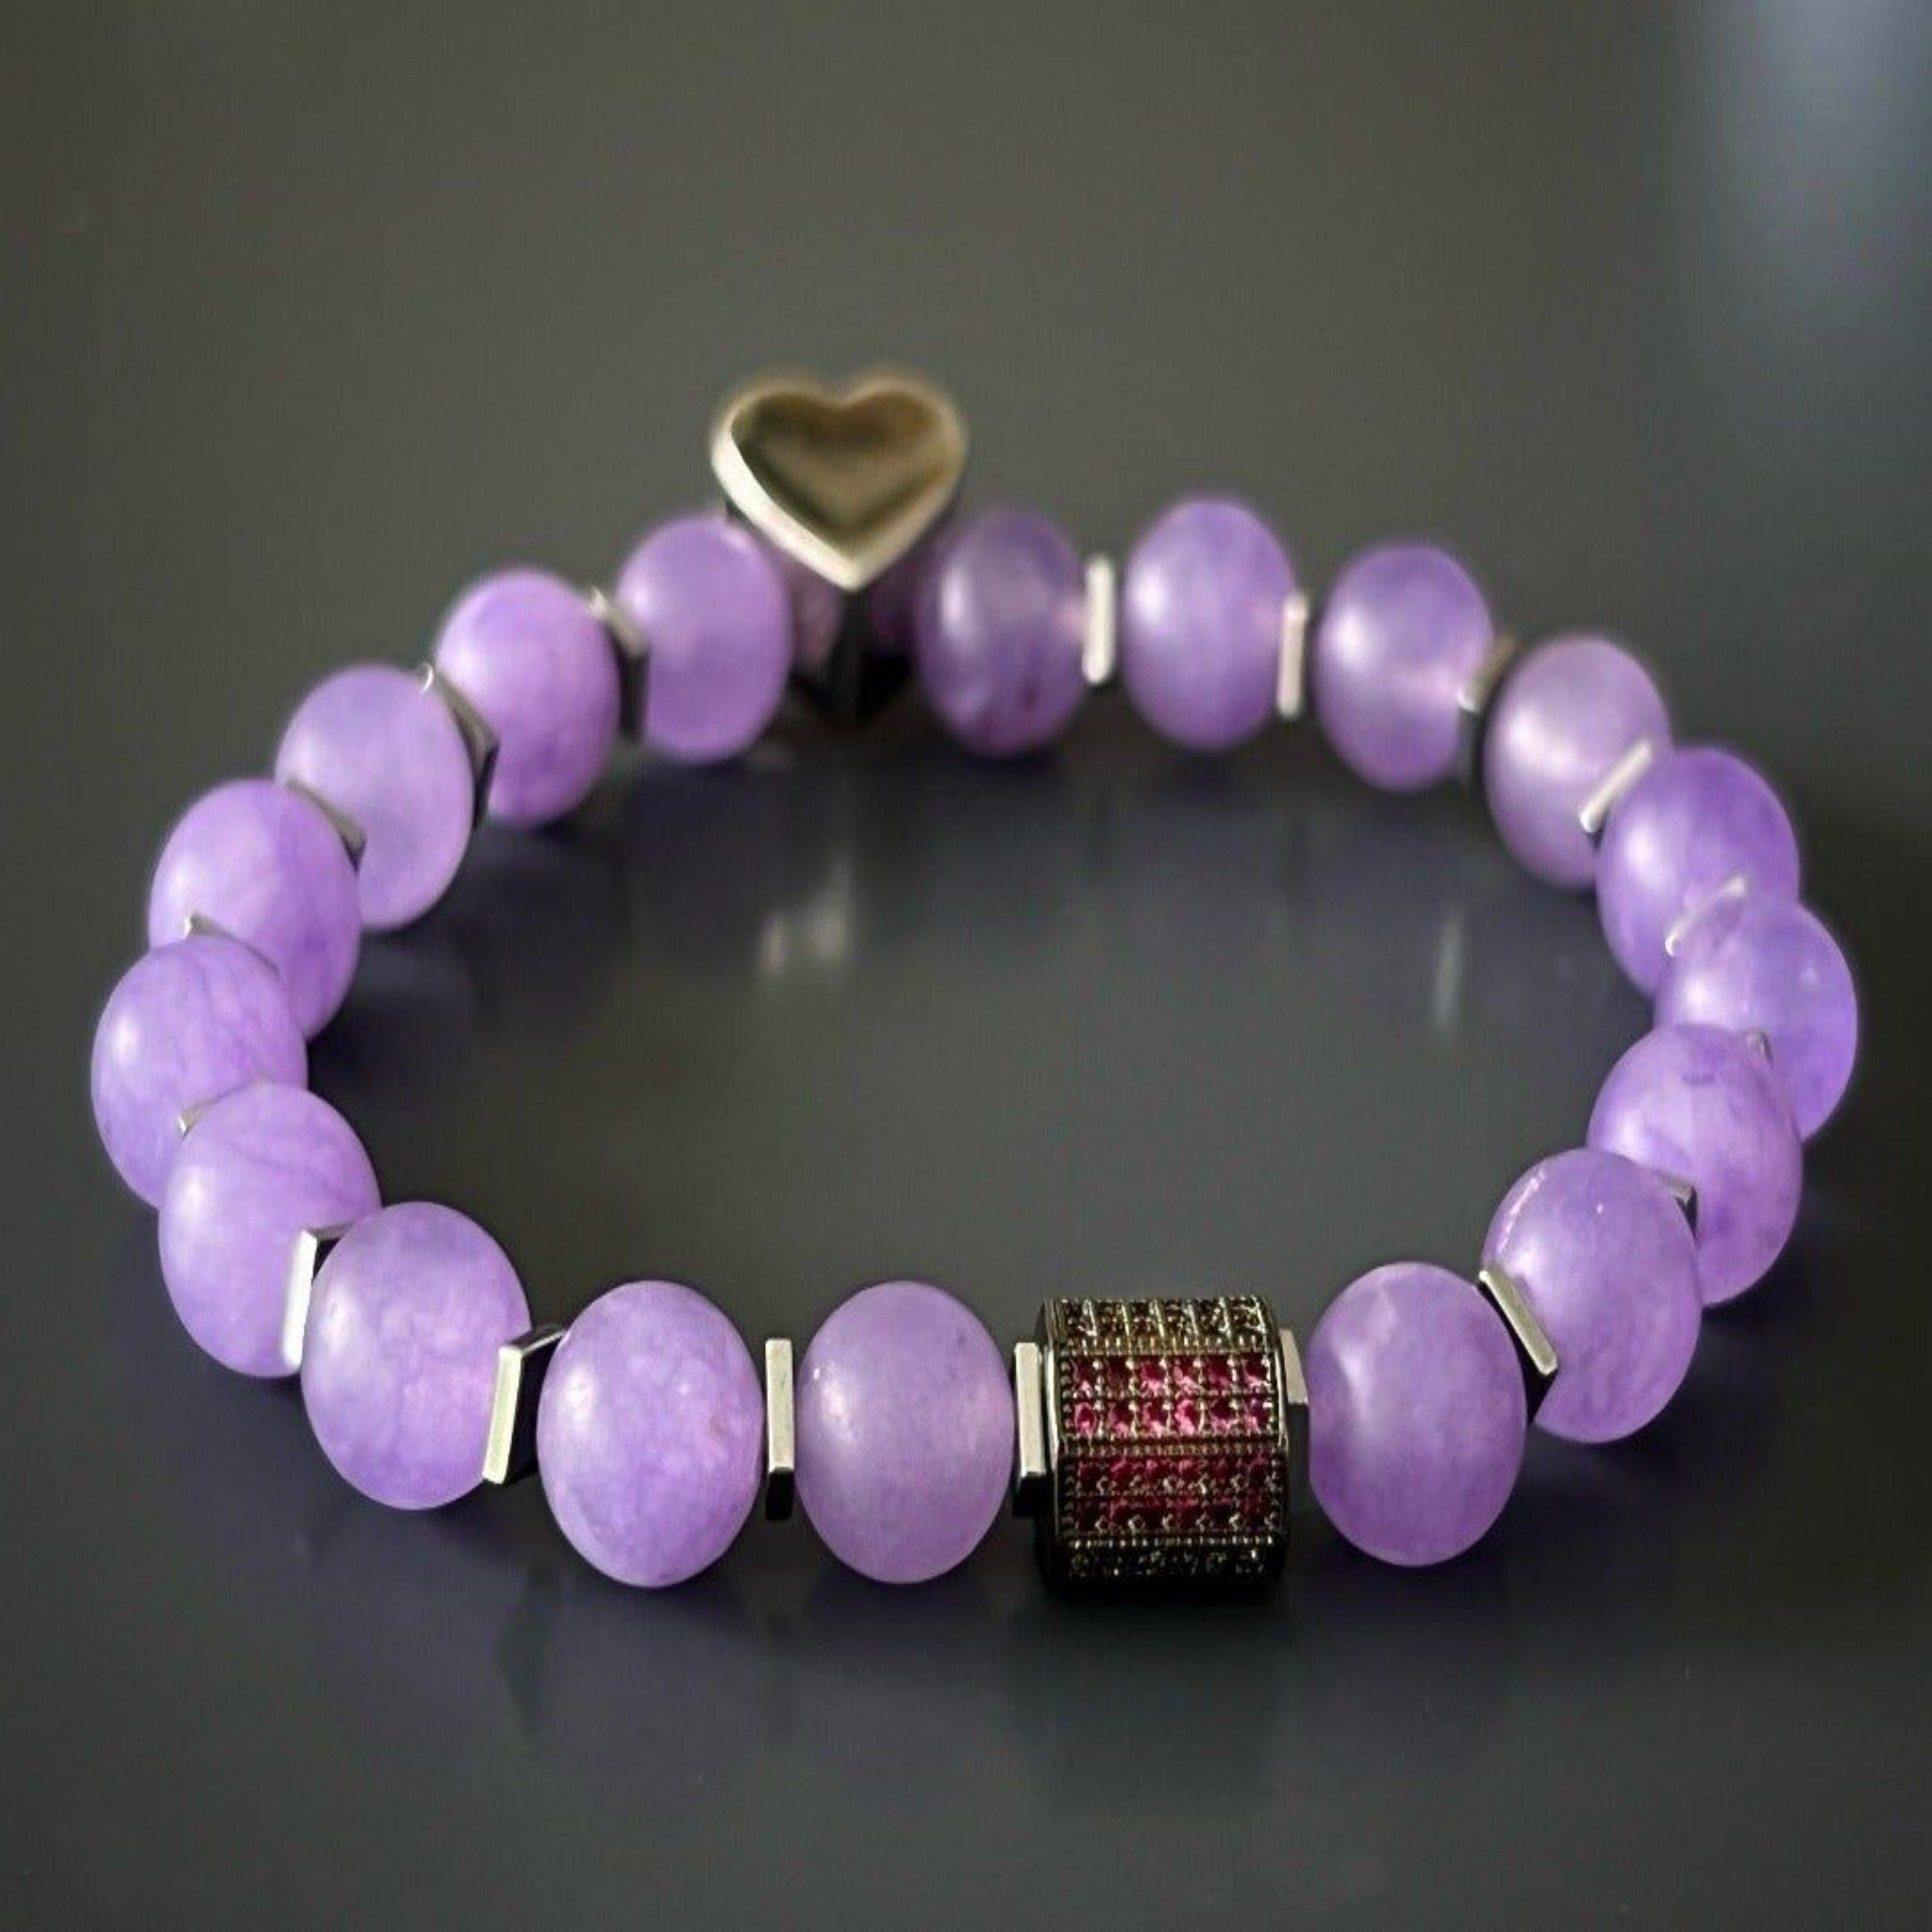 The Violet Love Bracelet symbolizes love, healing, and sophistication, with its combination of purple jade beads, sterling silver heart charms, and a dazzling Swarovski crystal accent.